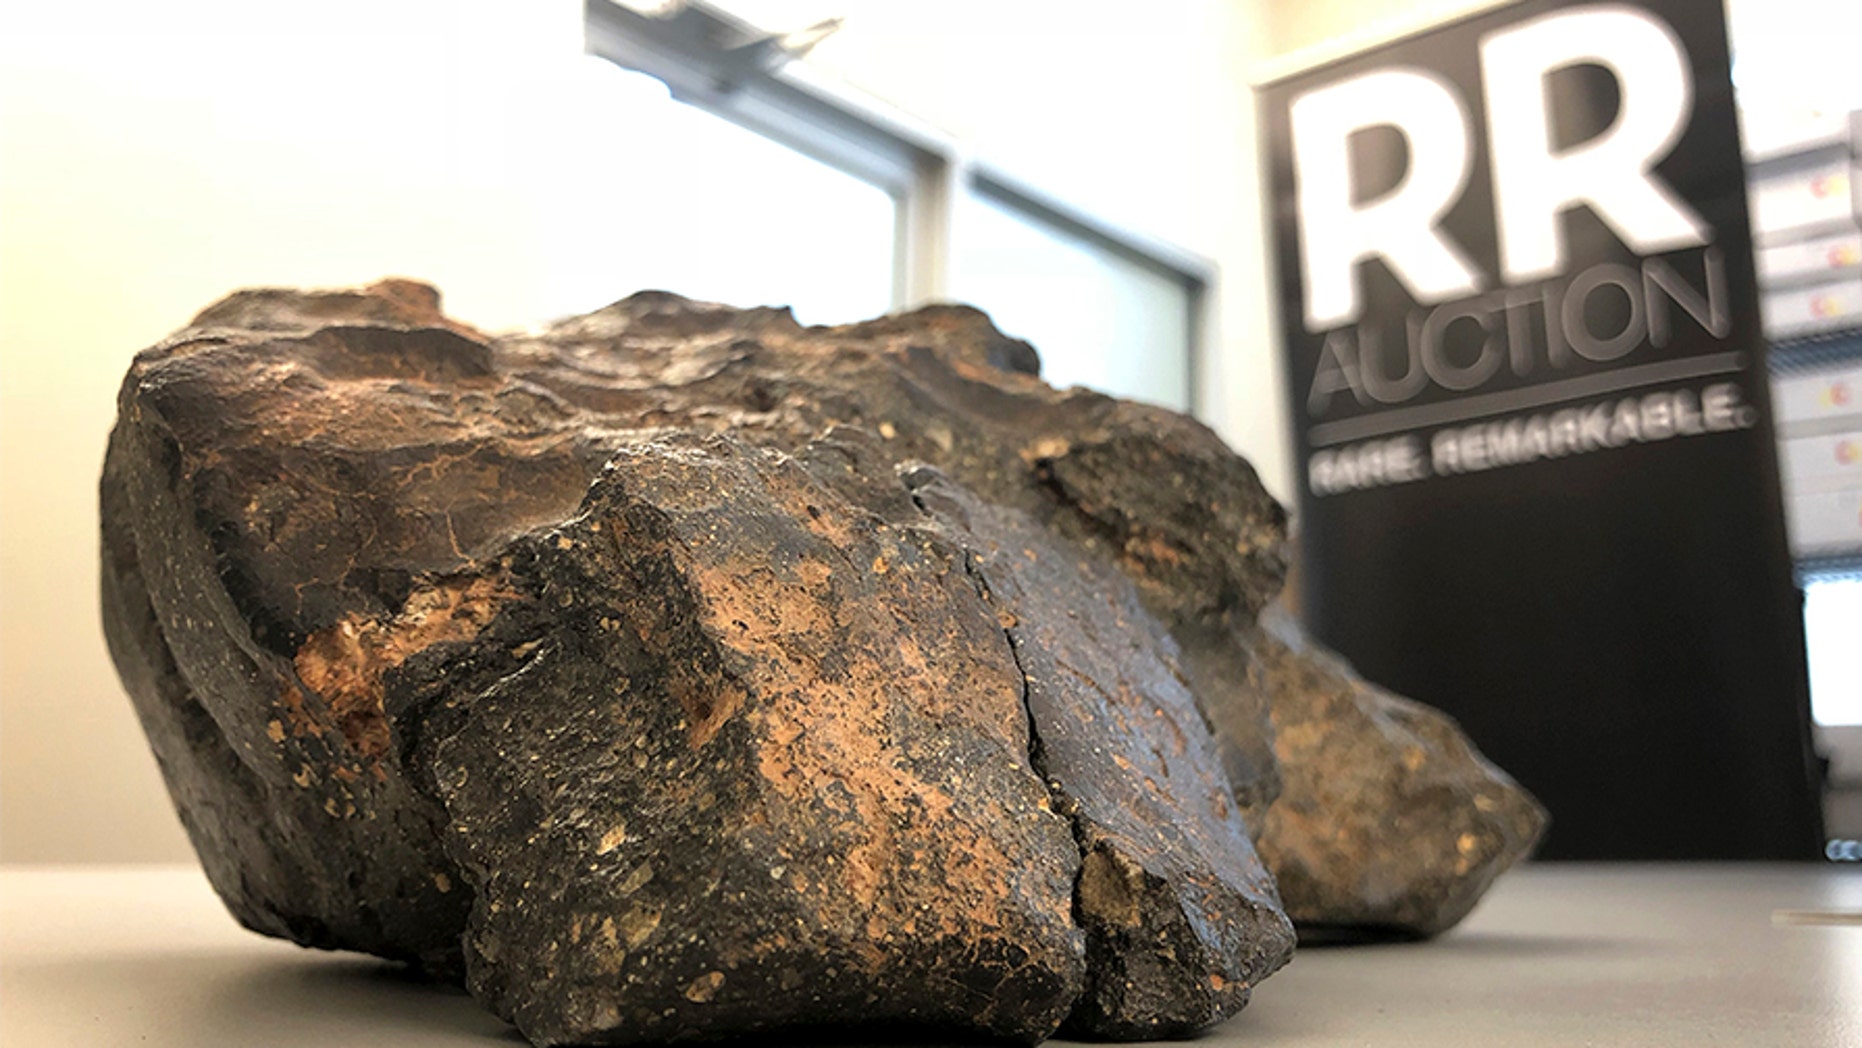 A Boston-based auction house is looking for the next proud owner of a 12-pound lunar meteorite, priced at $ 500,000.